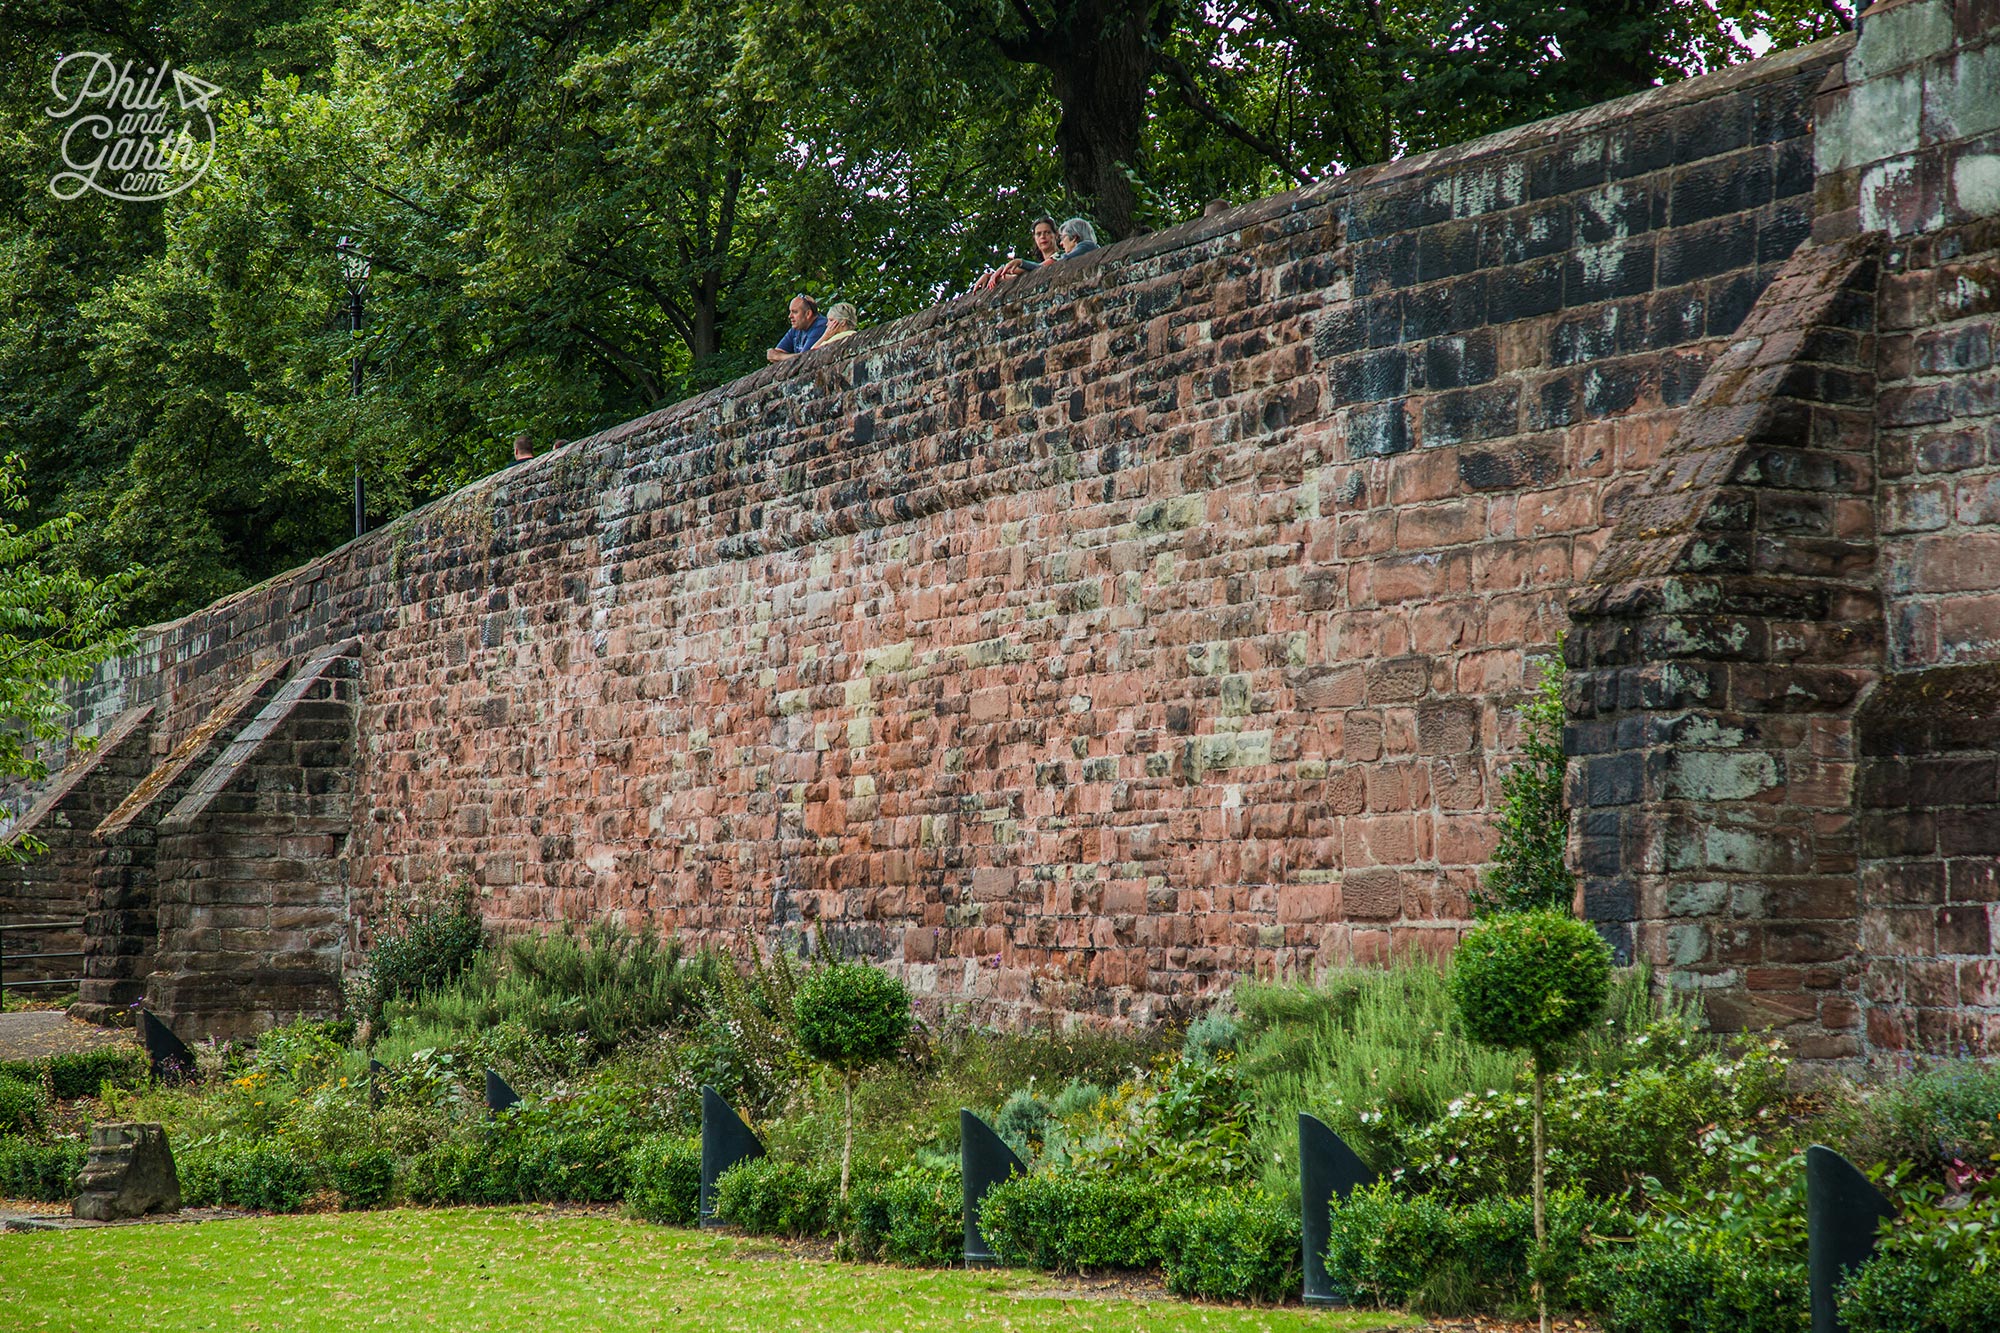 The city wall as seen from The Roman Gardens